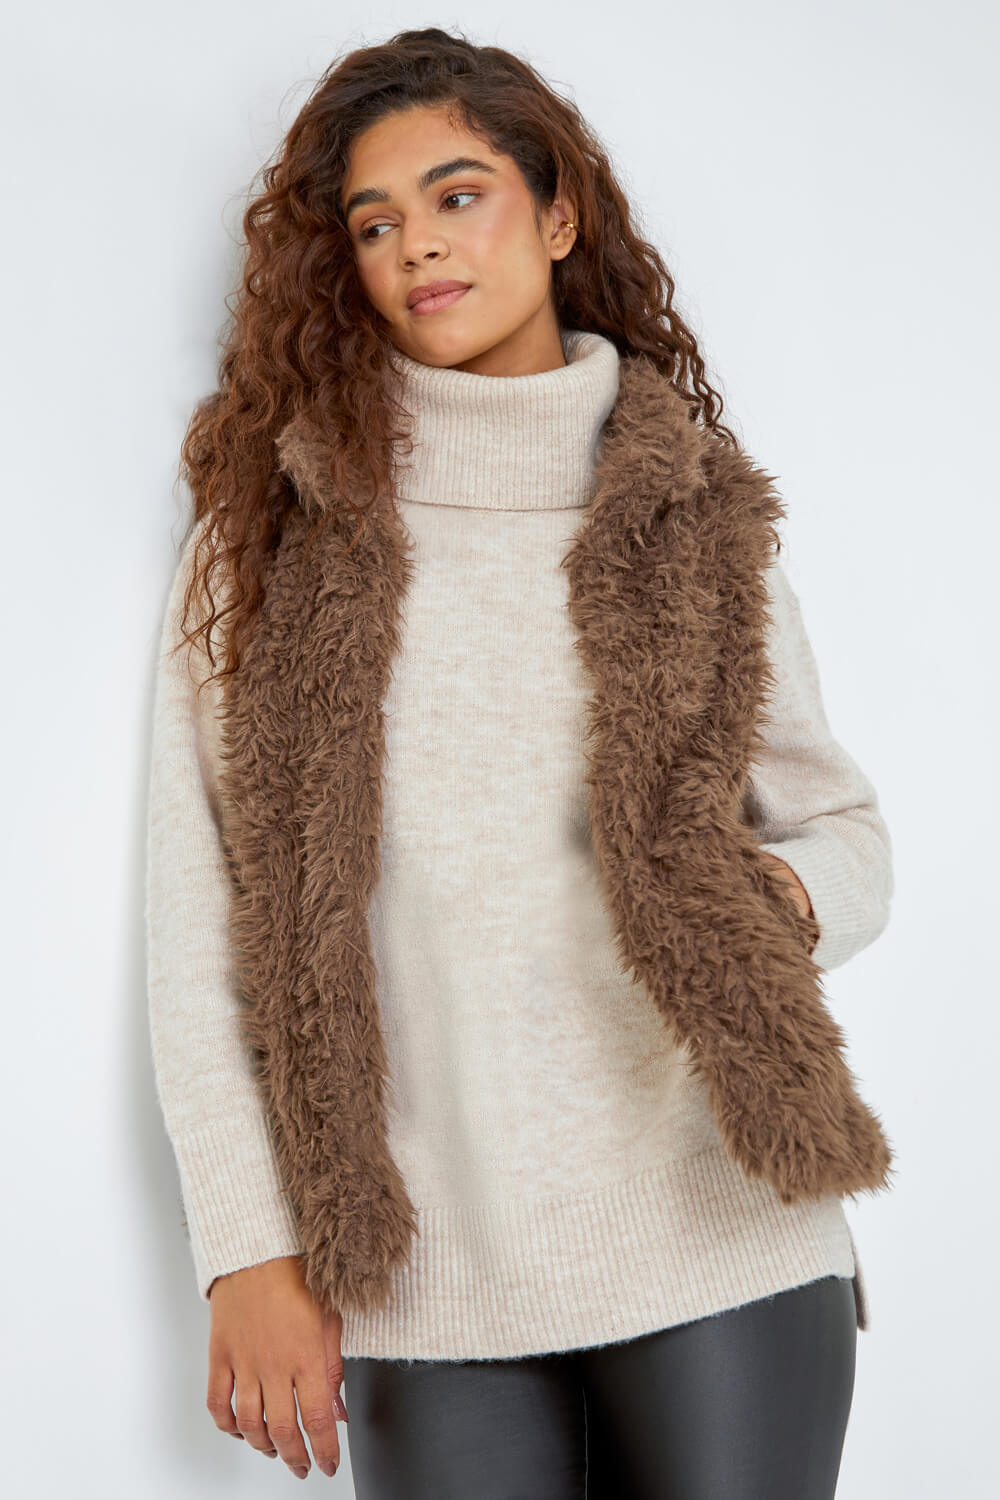 Taupe Faux Fur Fluffy Gilet, Image 1 of 5